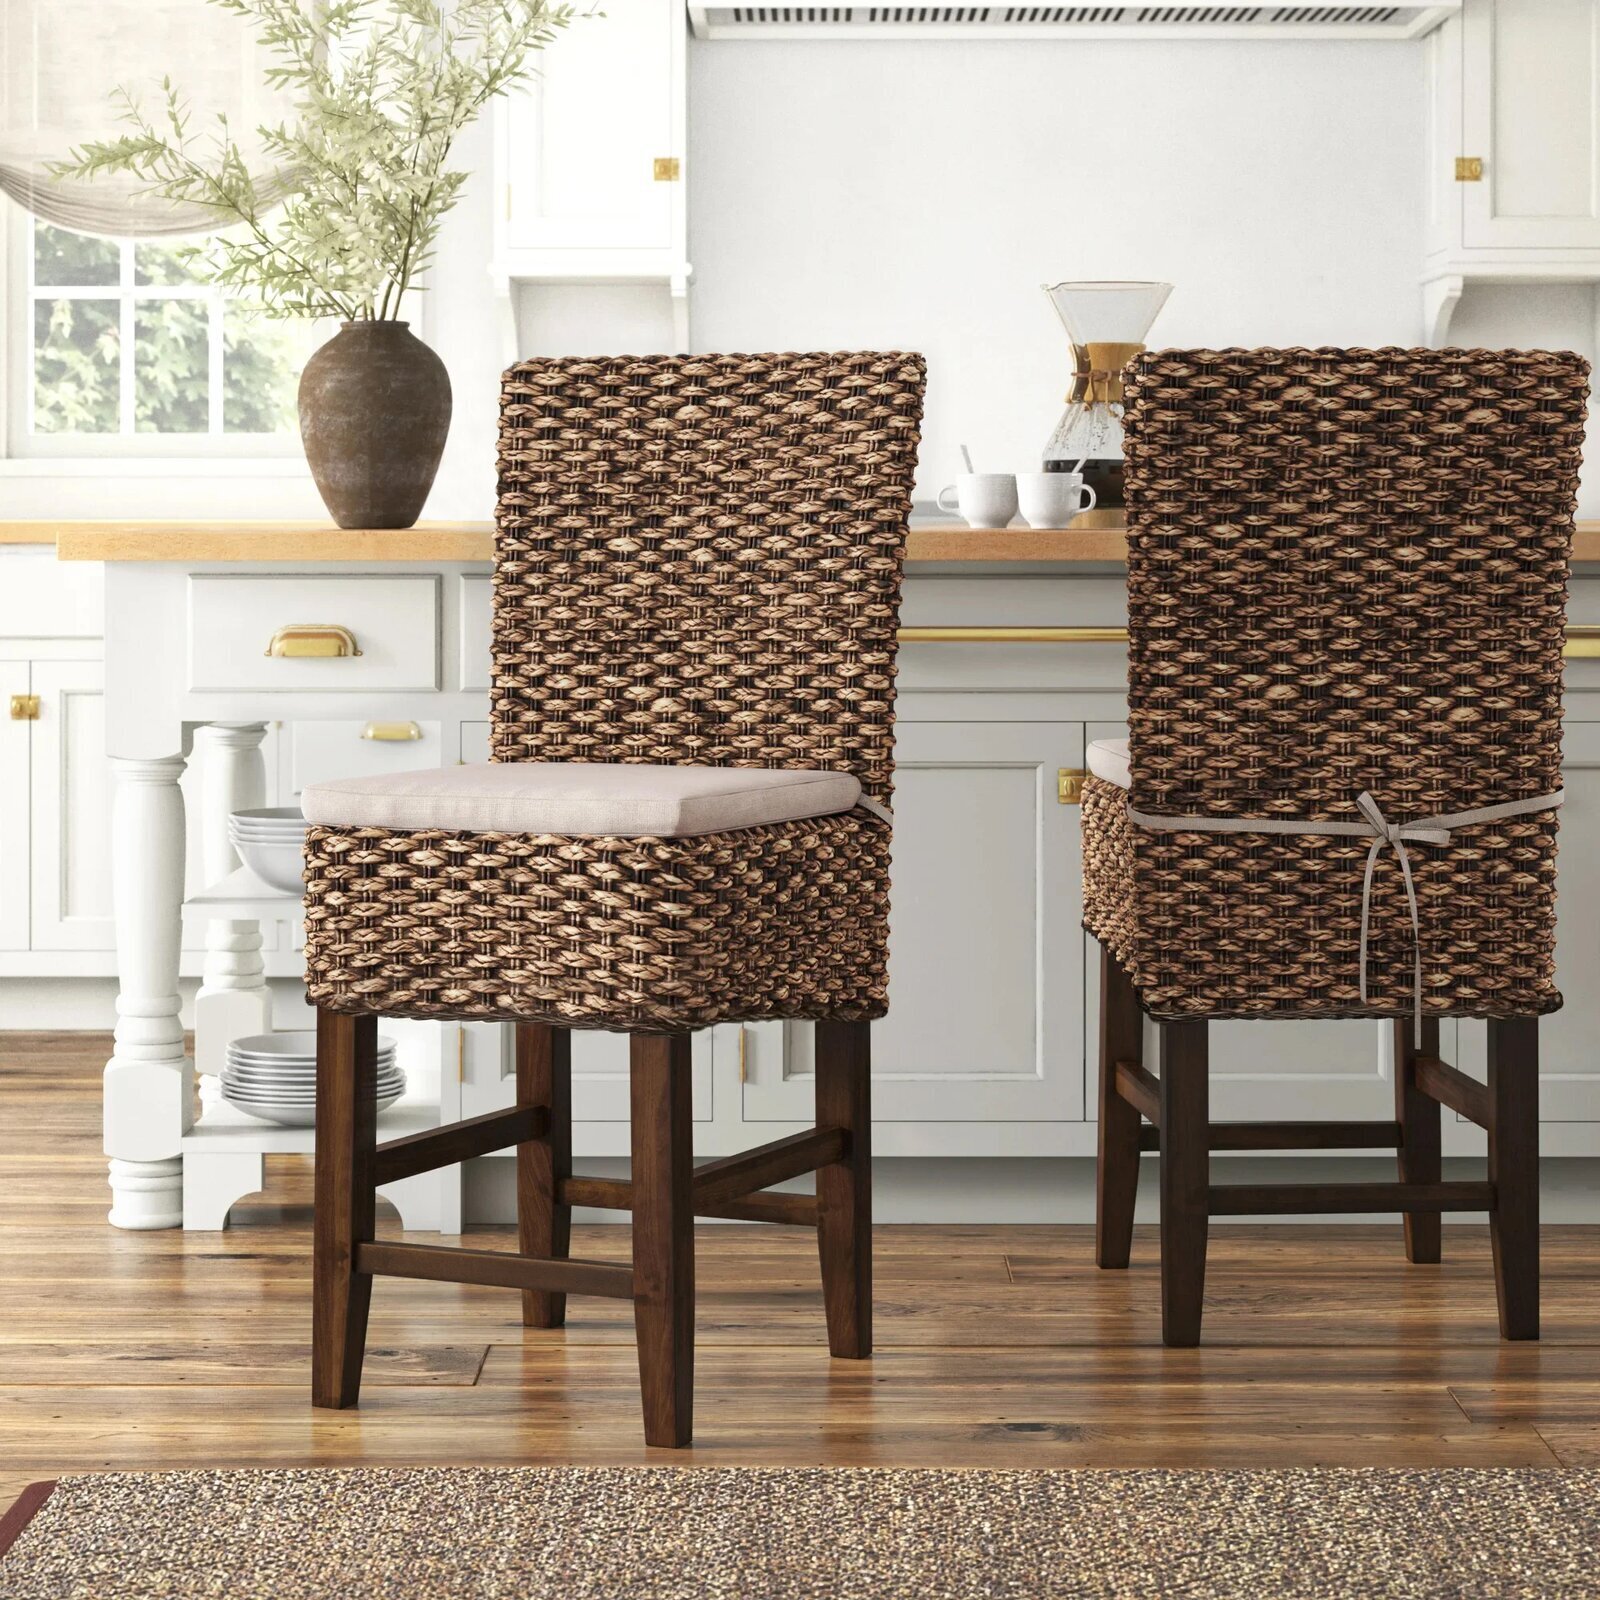 Set of 2 Seagrass Barstools